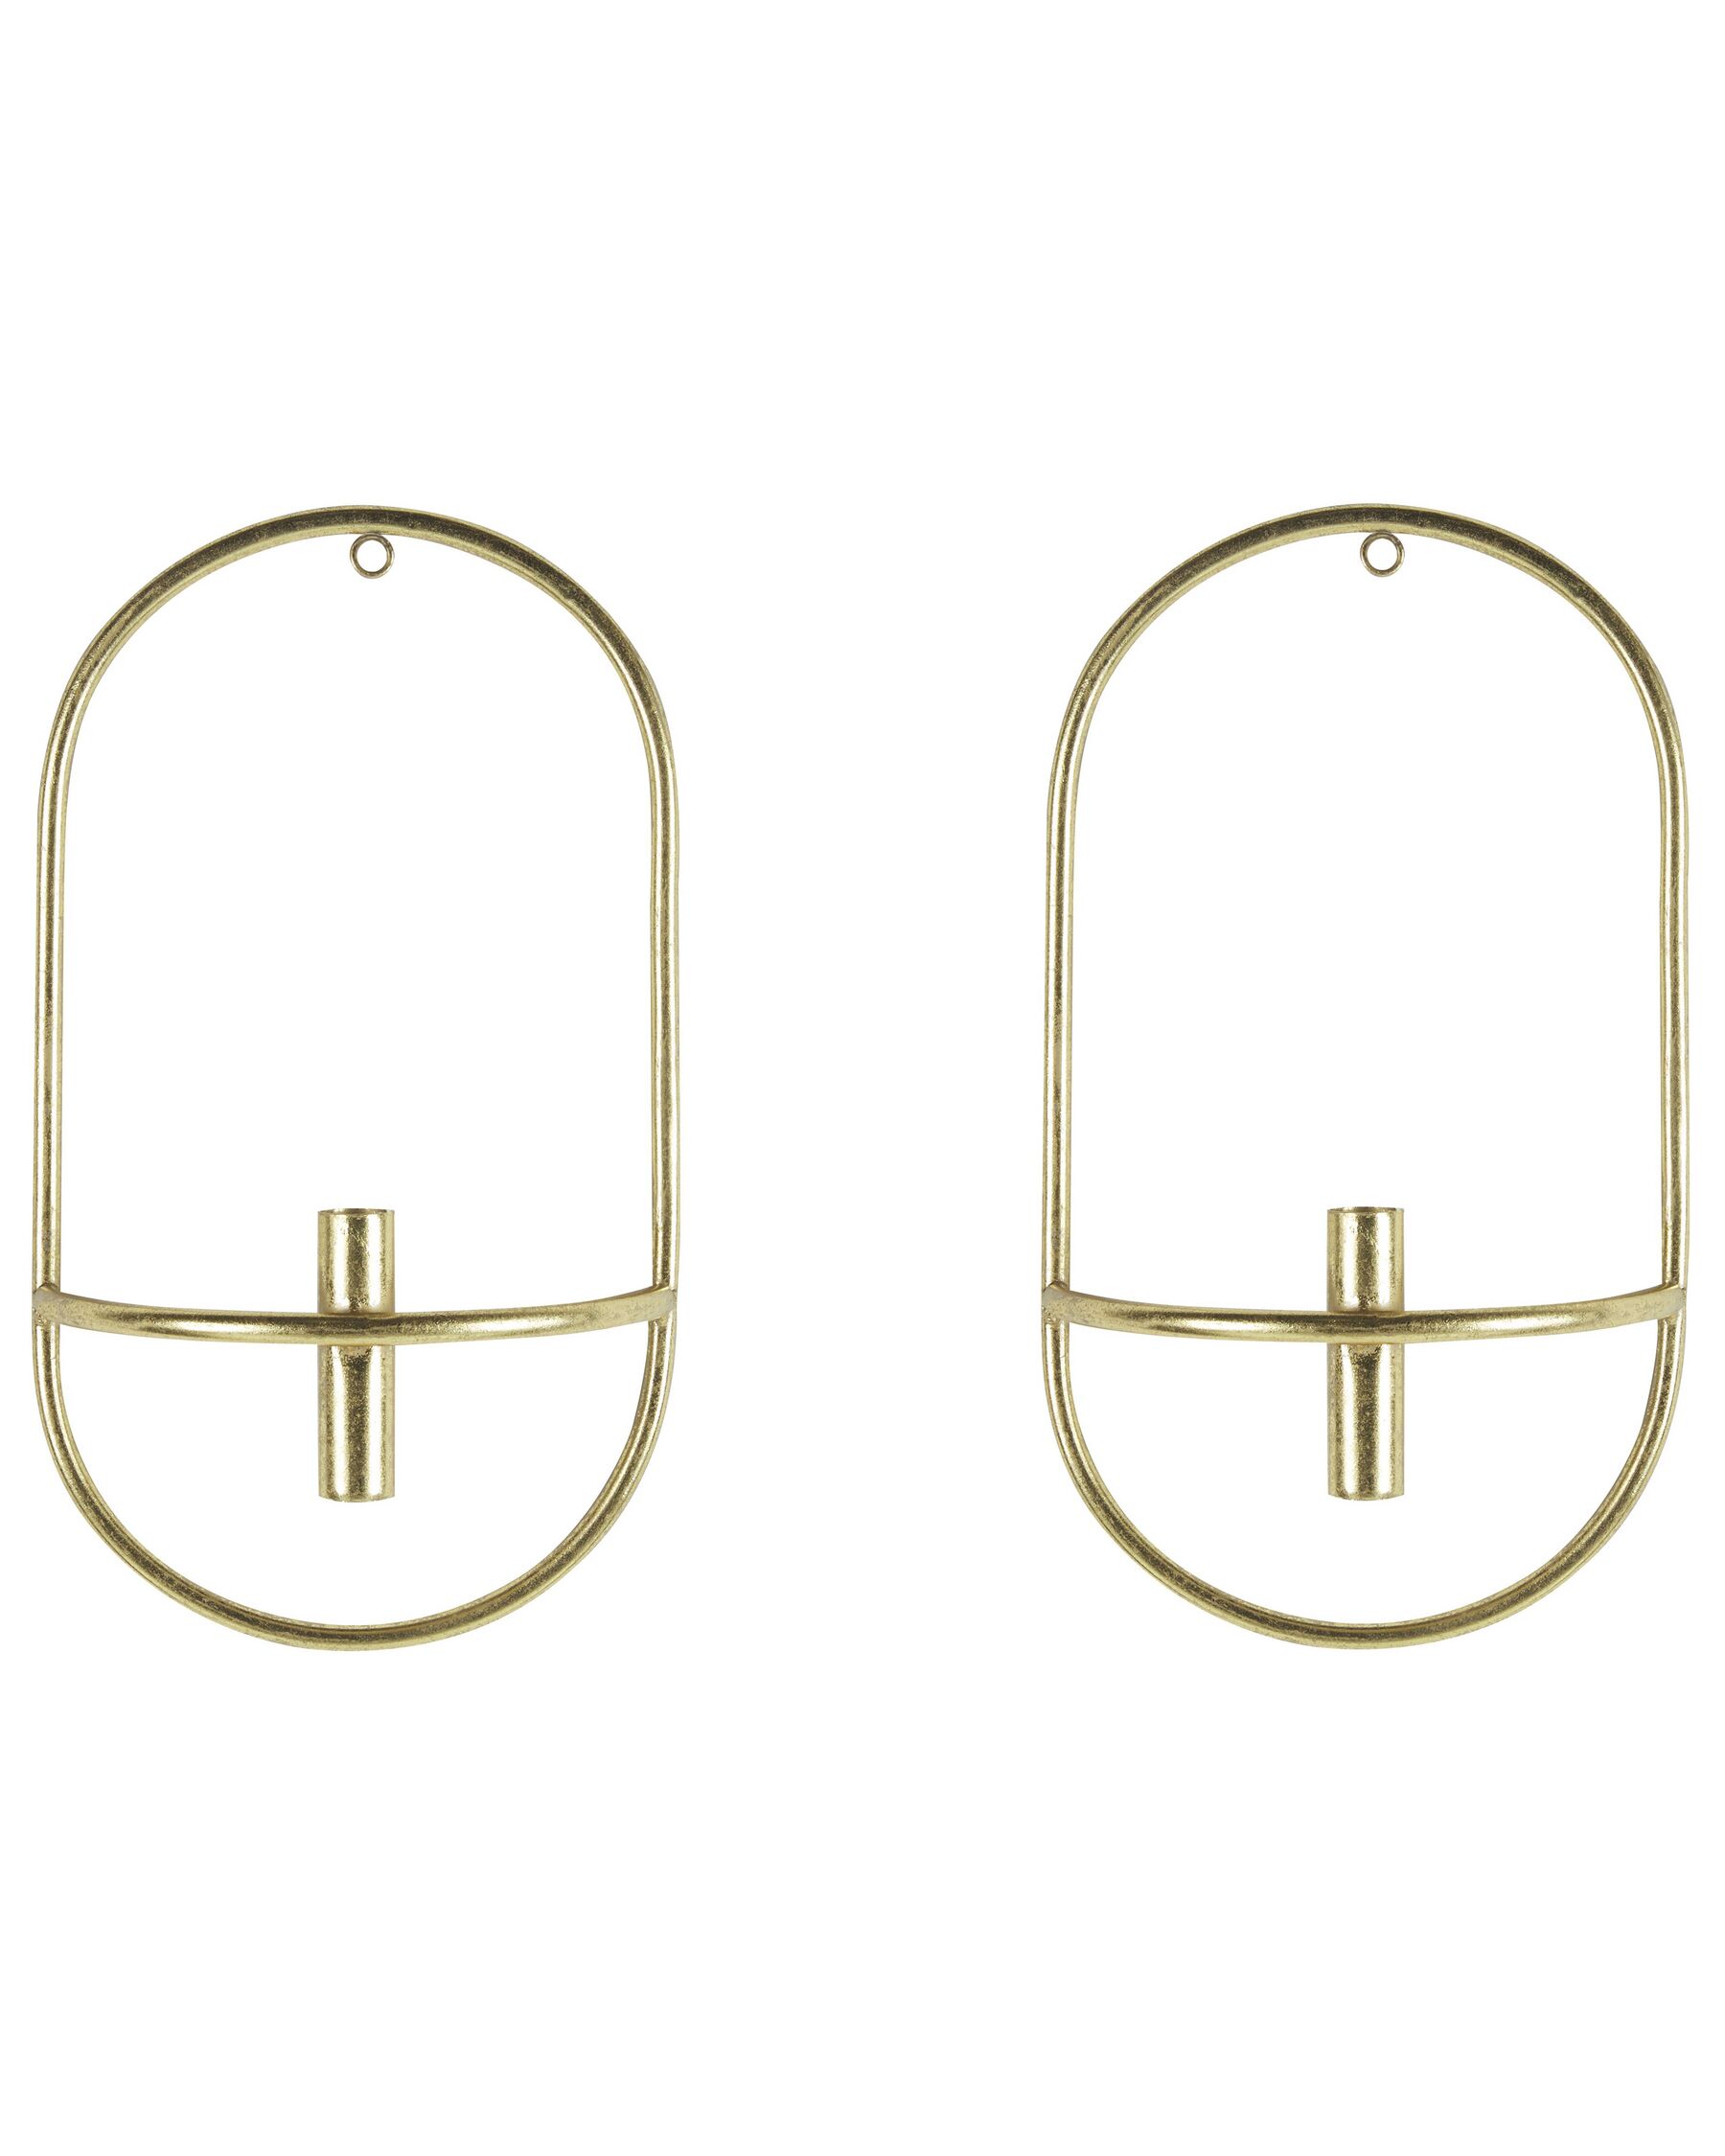 Set of 2 Metal Wall Candle Holders Gold CAVIANA_826481